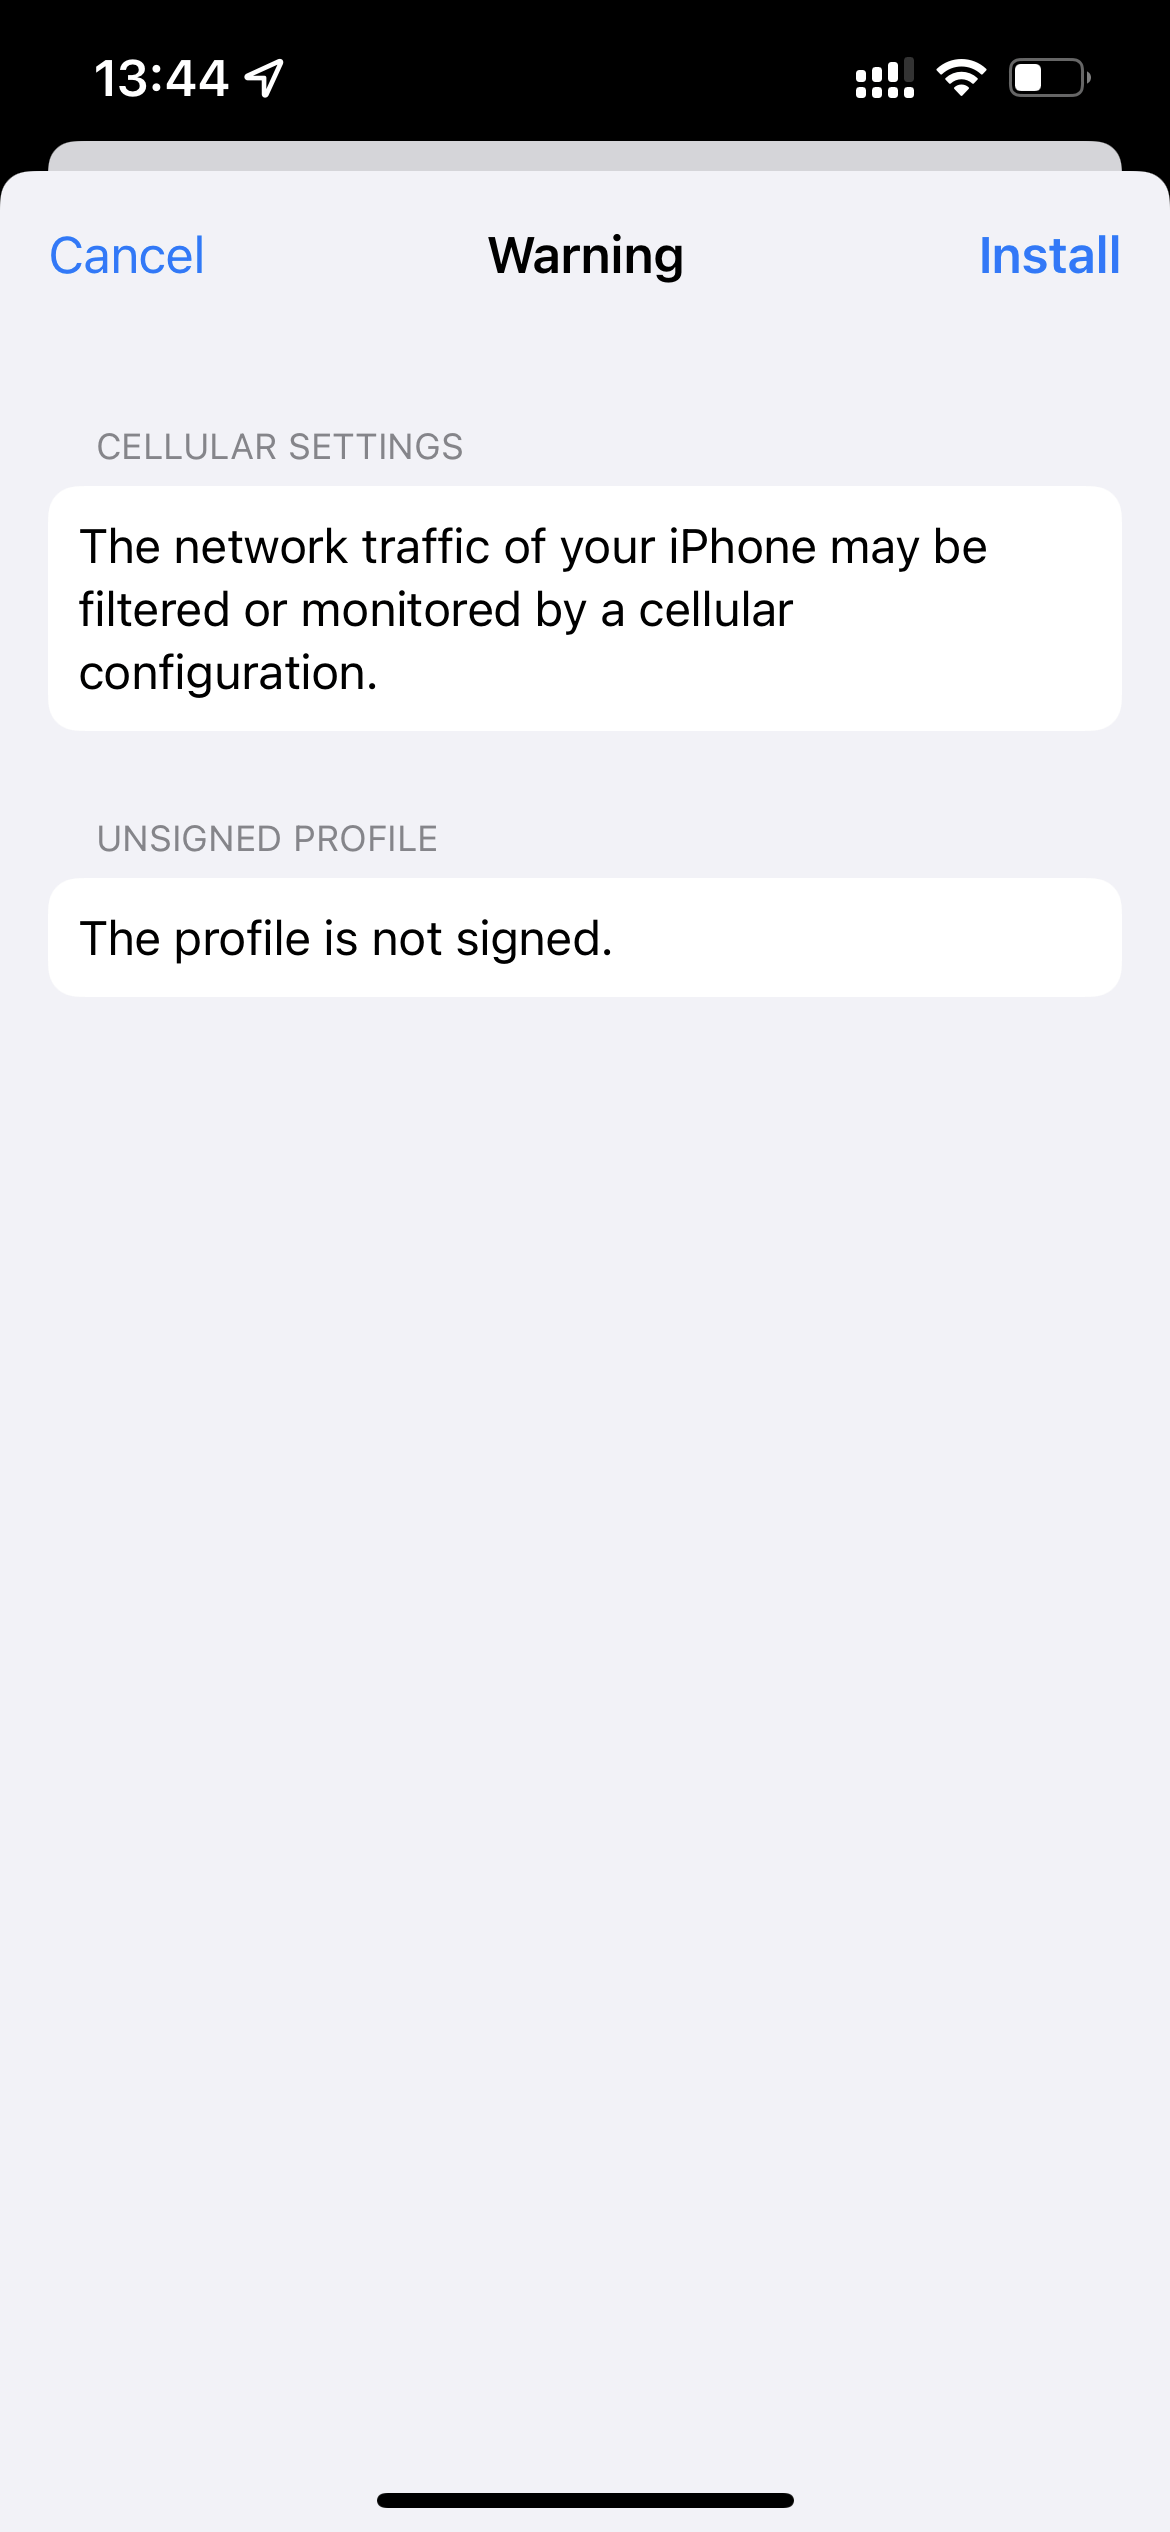 Install the profile